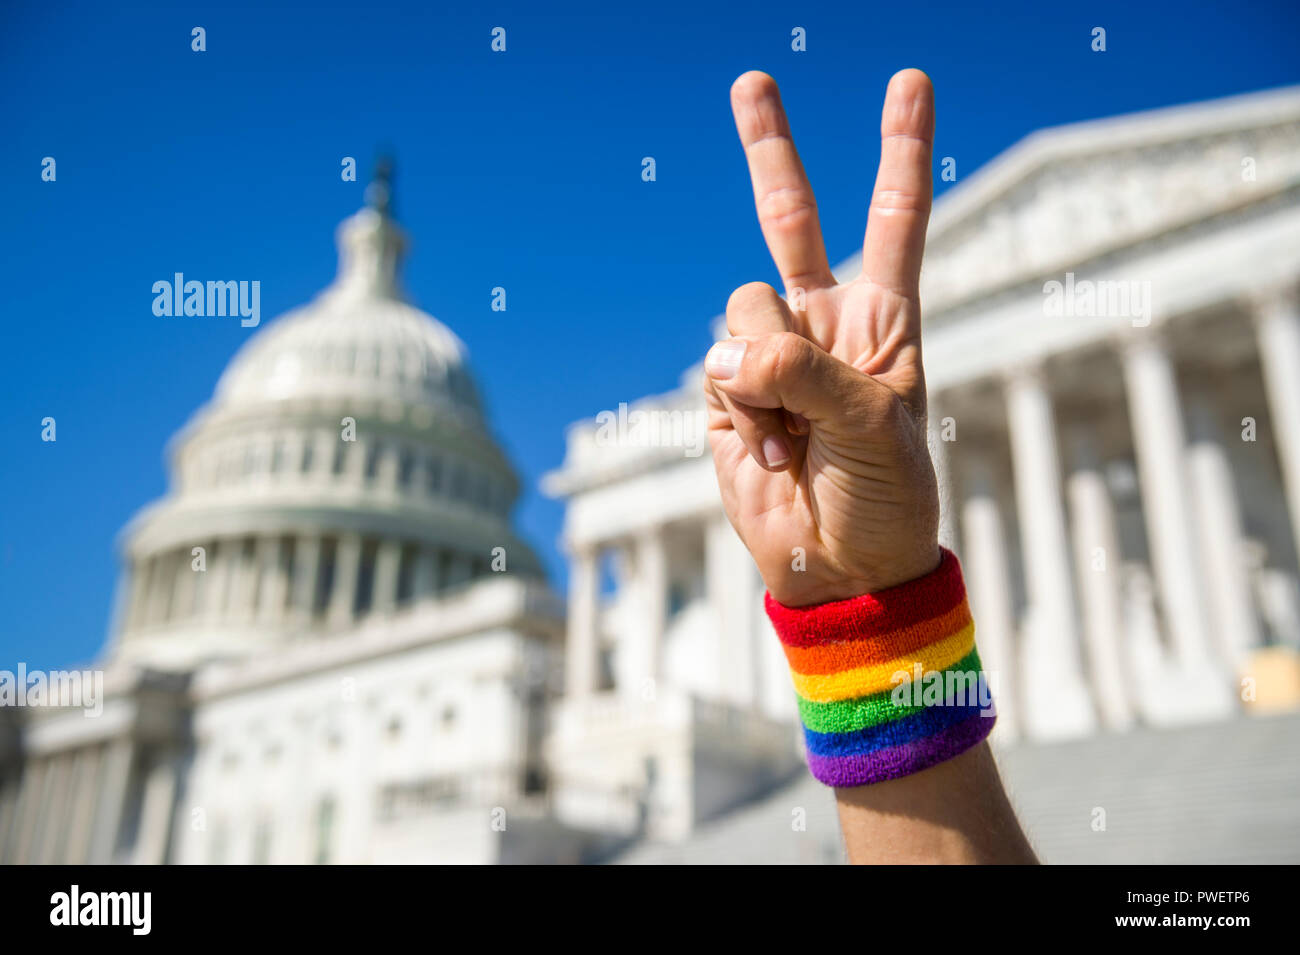 Hand with gay pride rainbow wristband making a peace sign in front of the Capitol Building in Washington, DC, USA Stock Photo